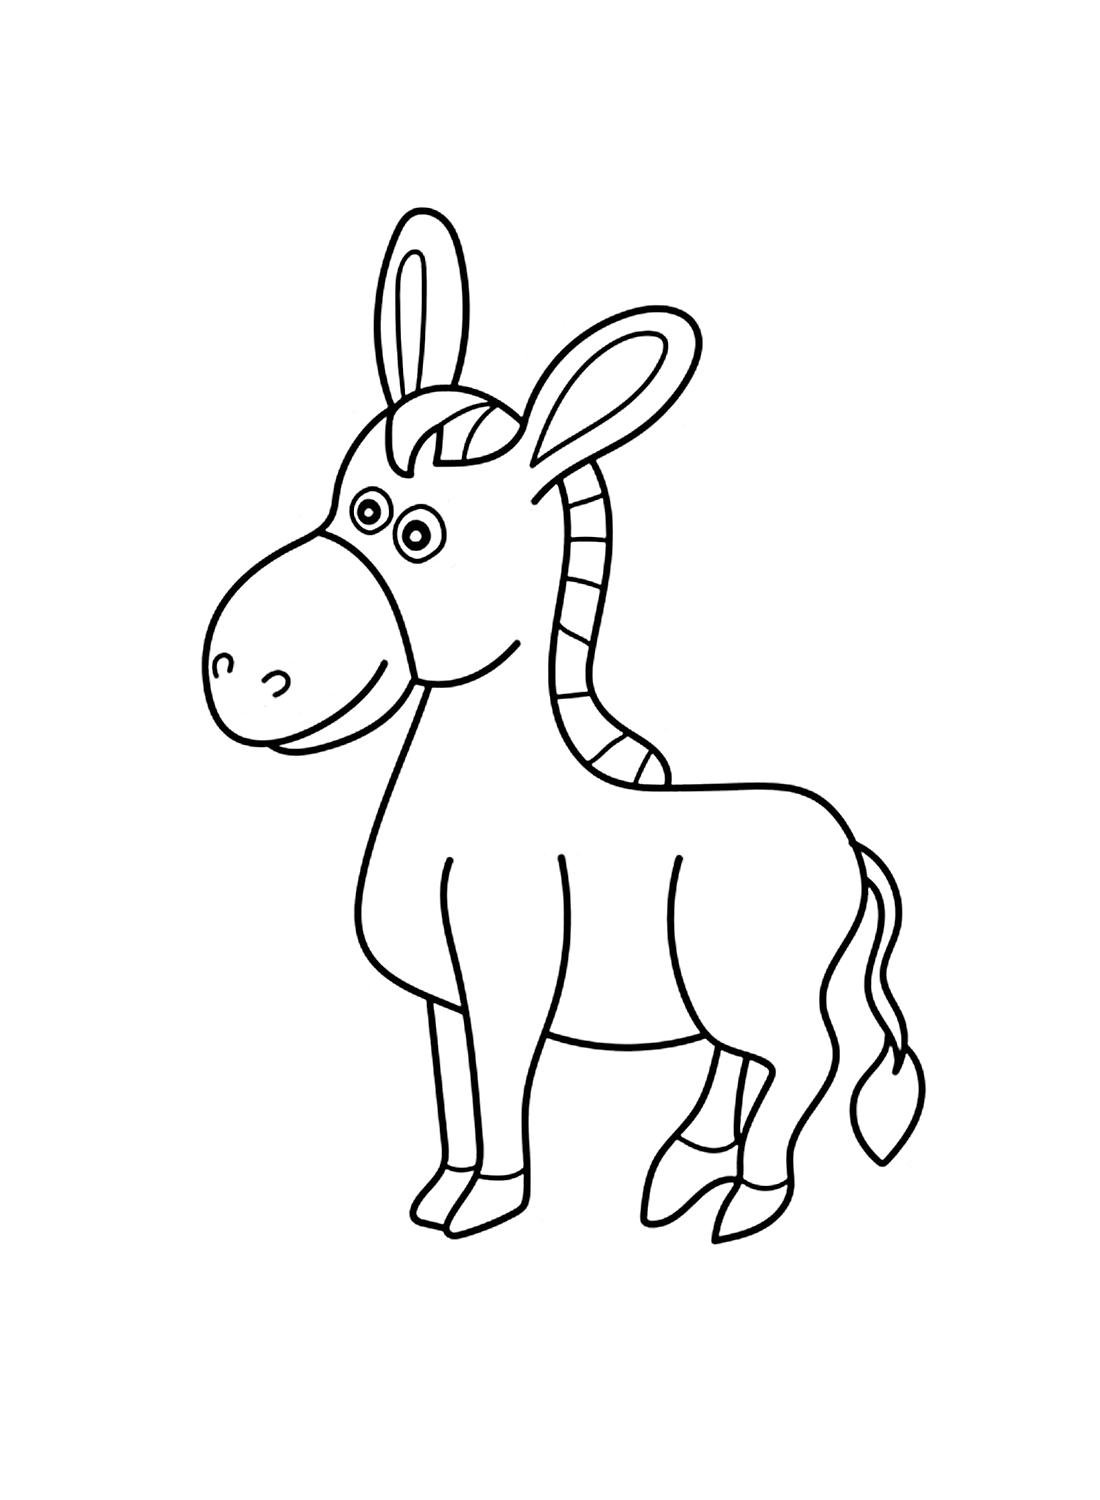 Walking Donkey Coloring Pages